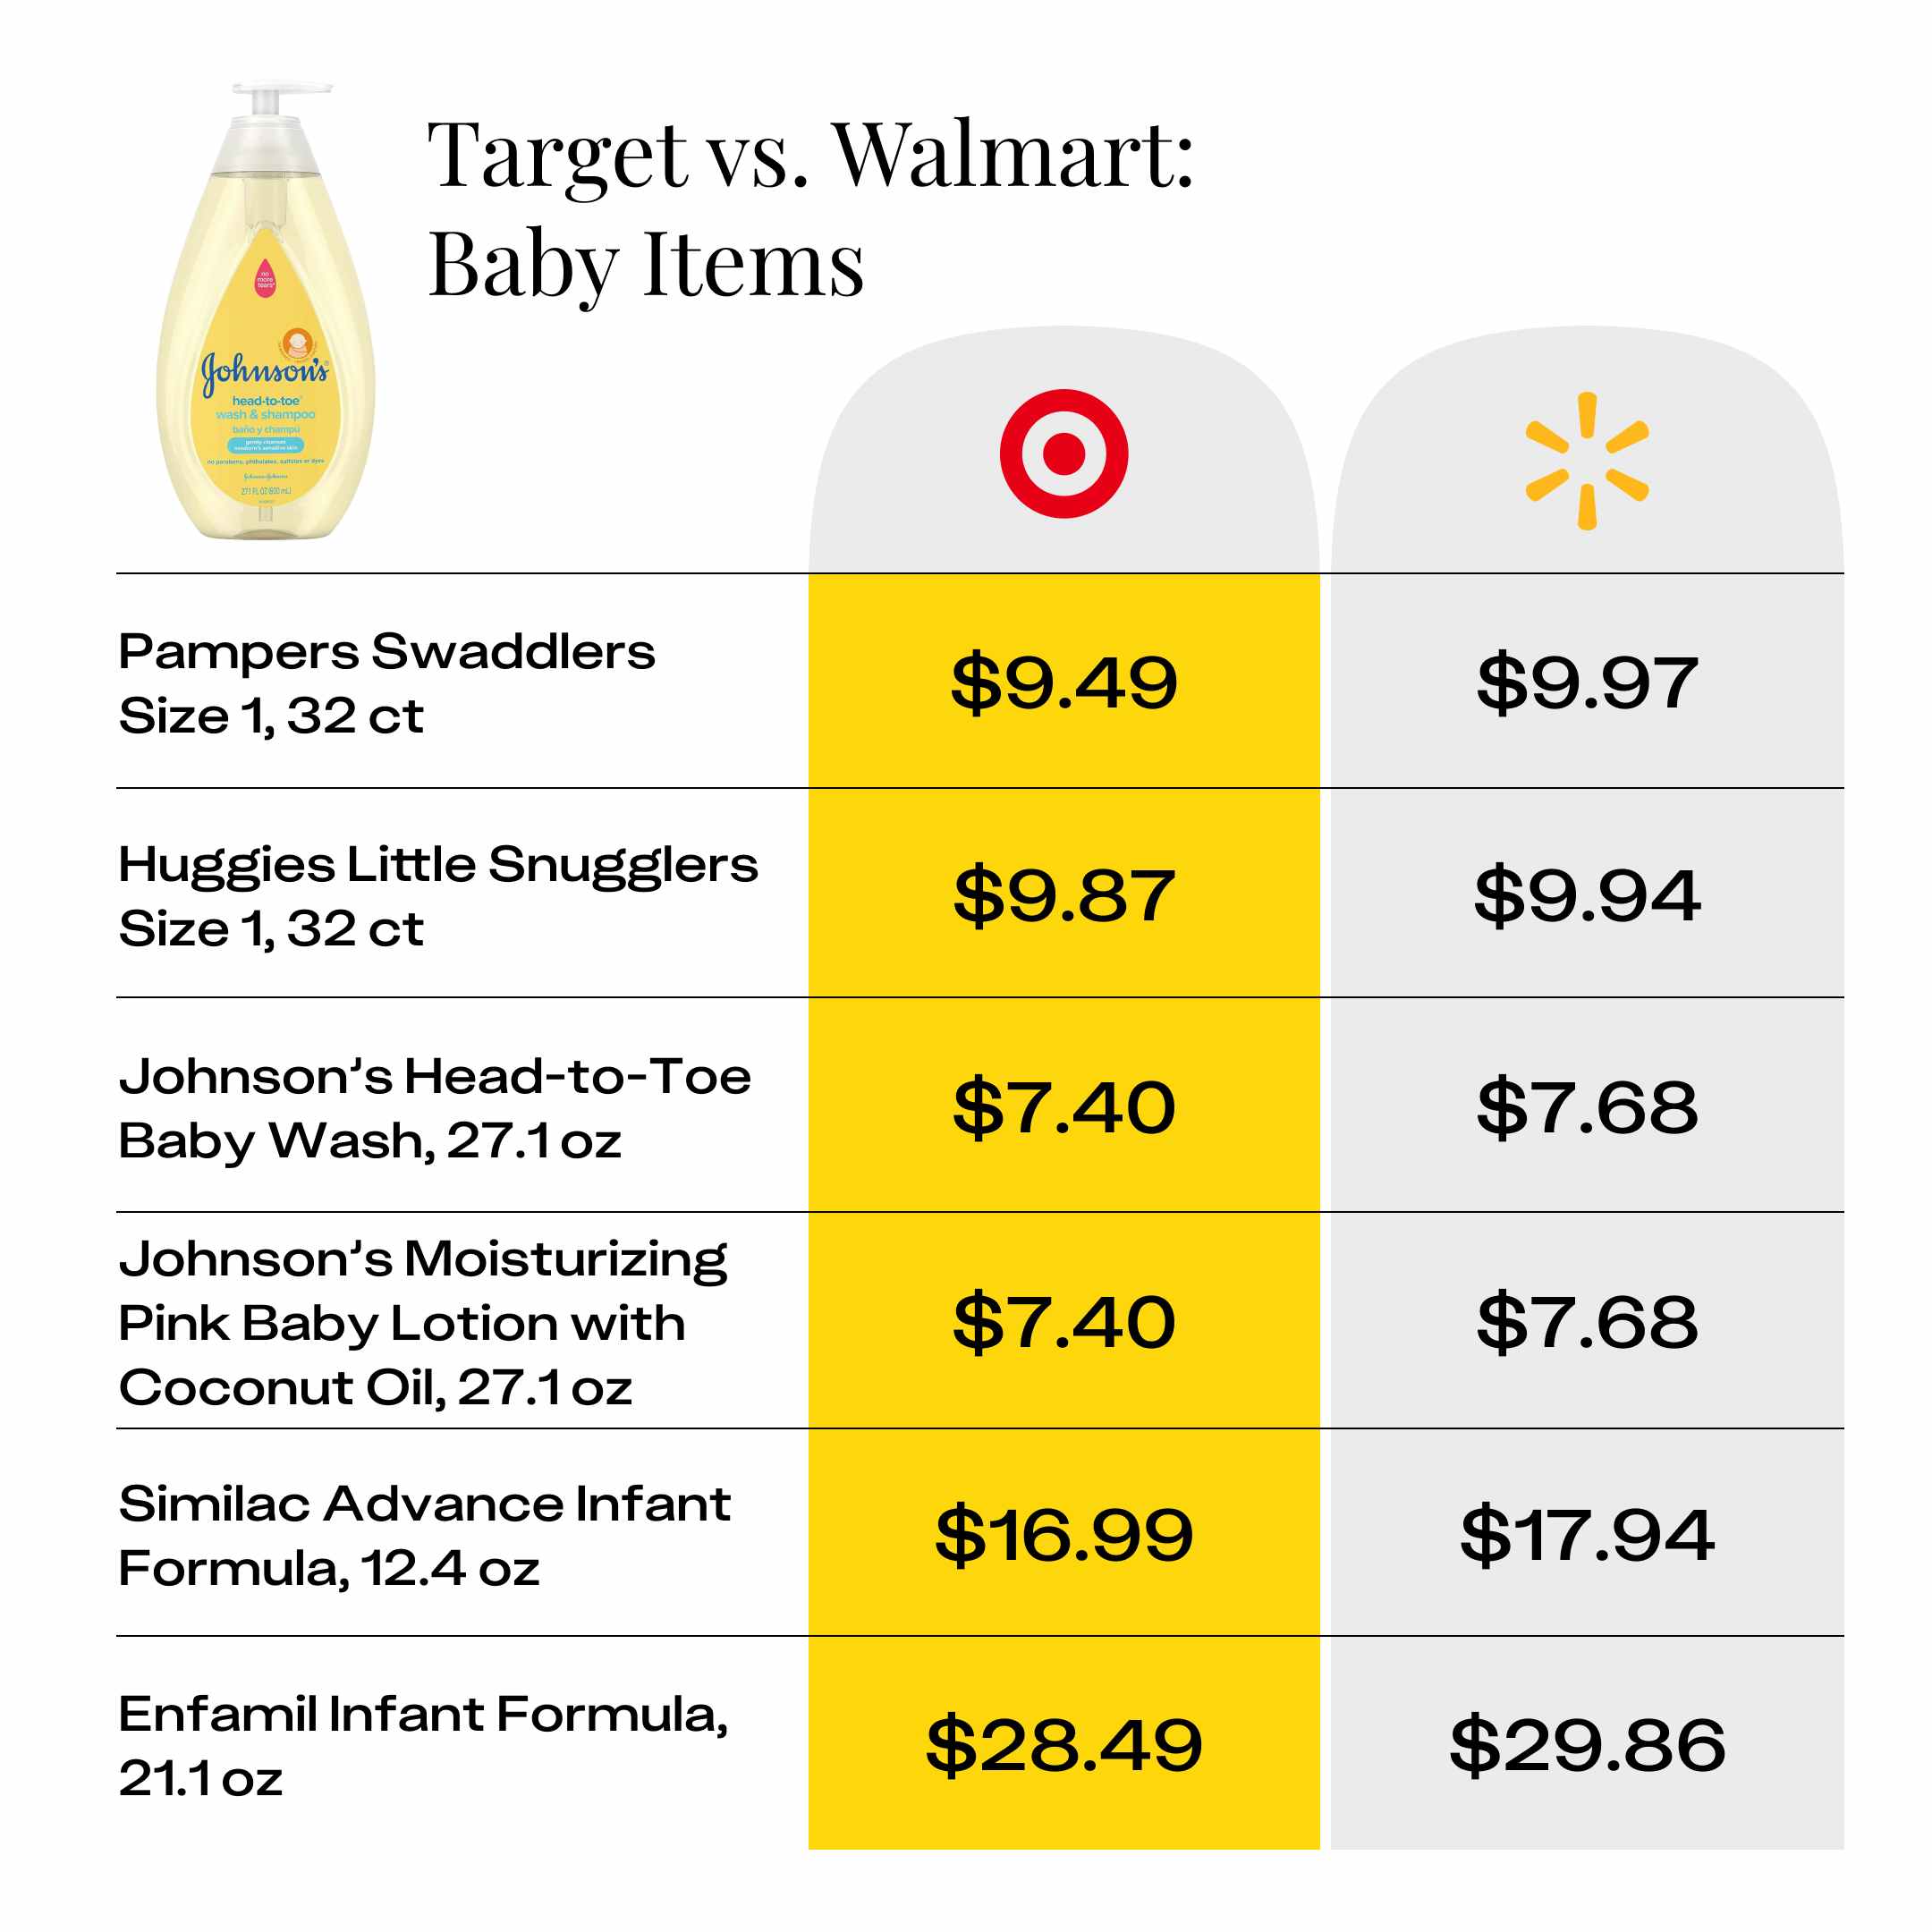 price comparison for baby items at Target and Walmart